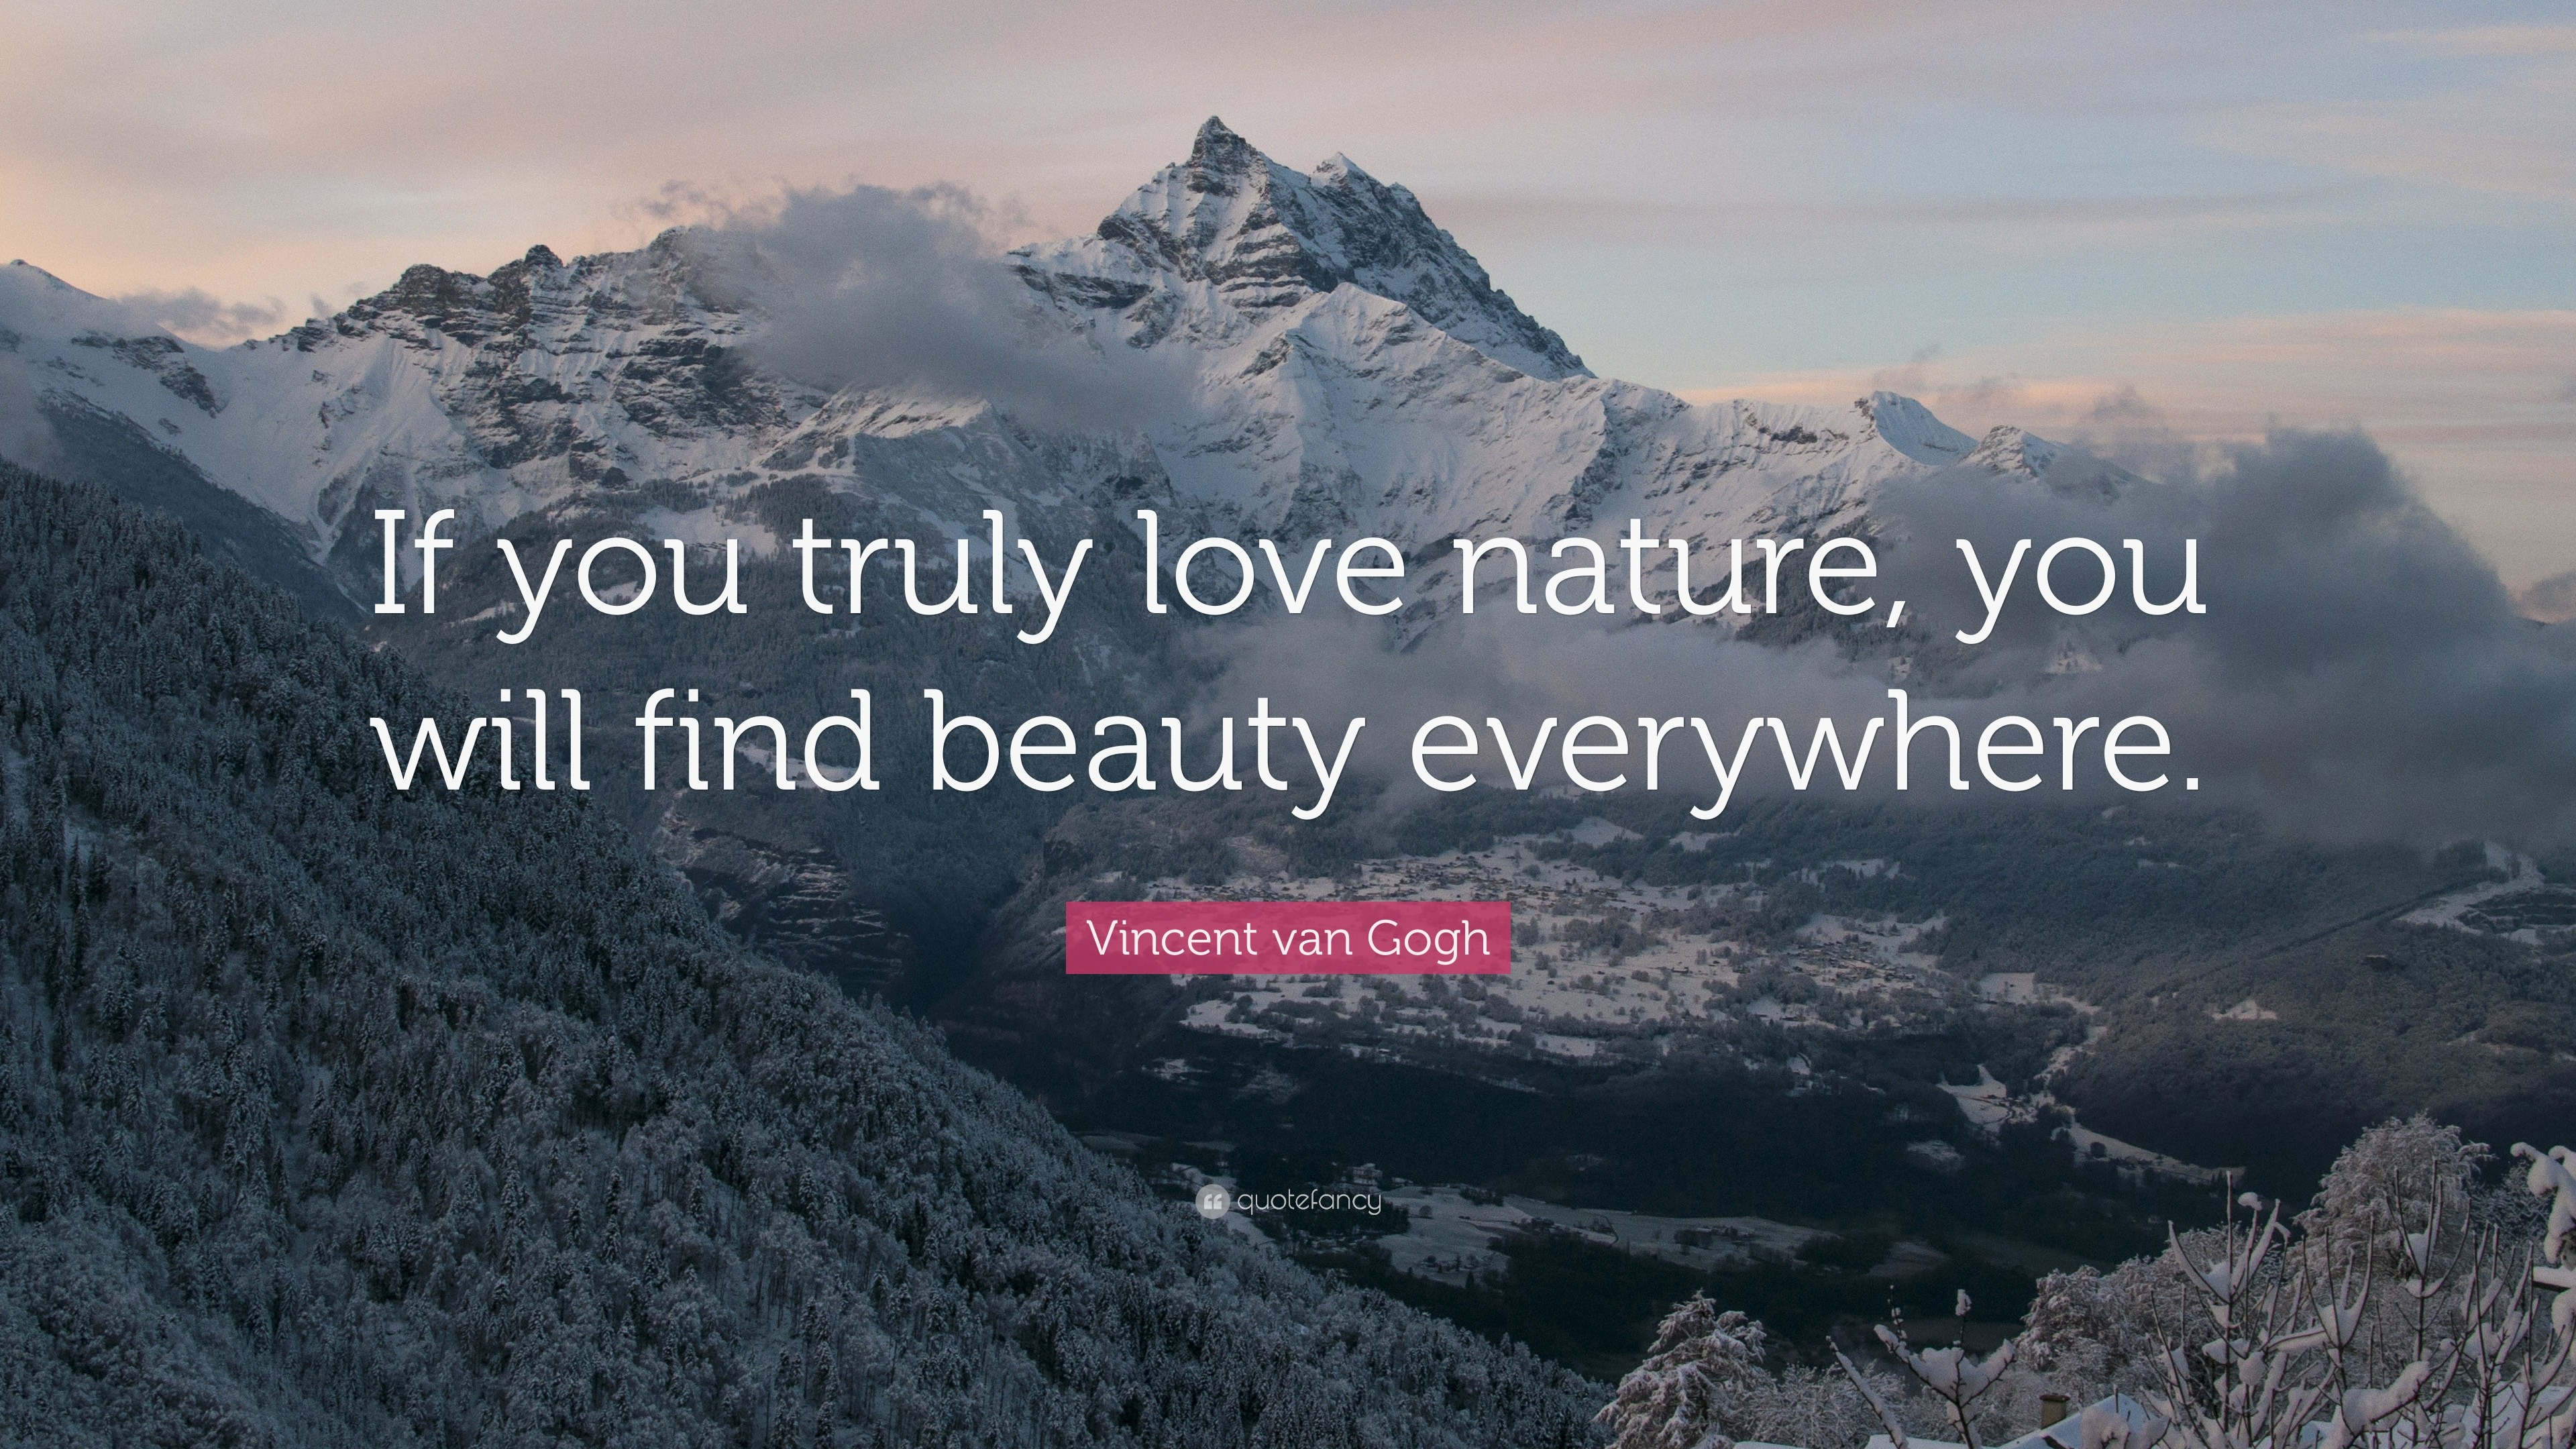 Vincent van Gogh Quote: “If you truly love nature, you will find beauty